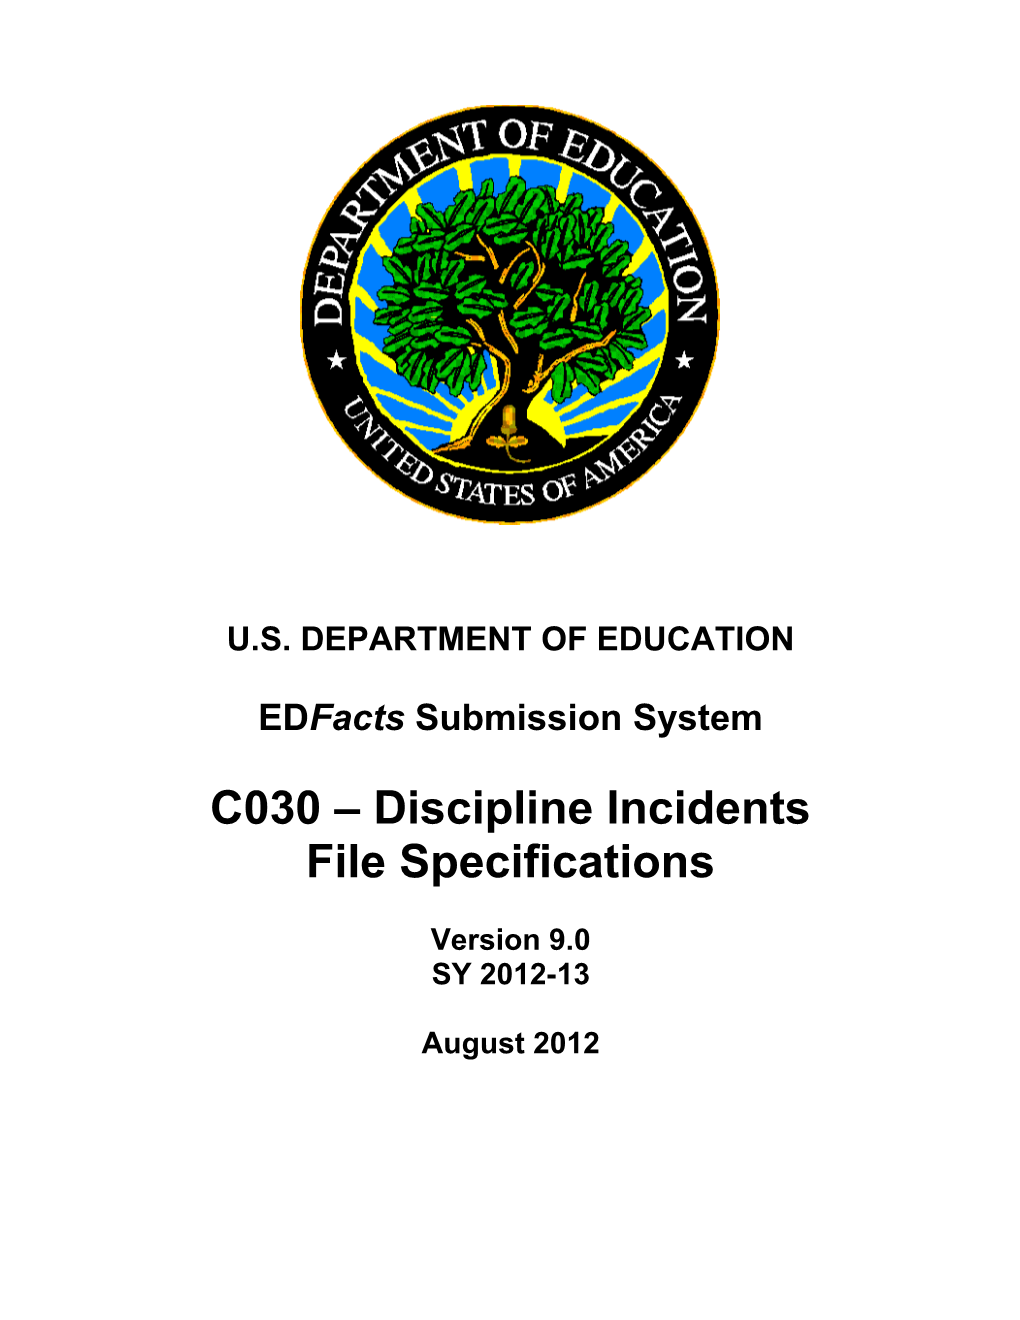 Discipline Incidents File Specifications